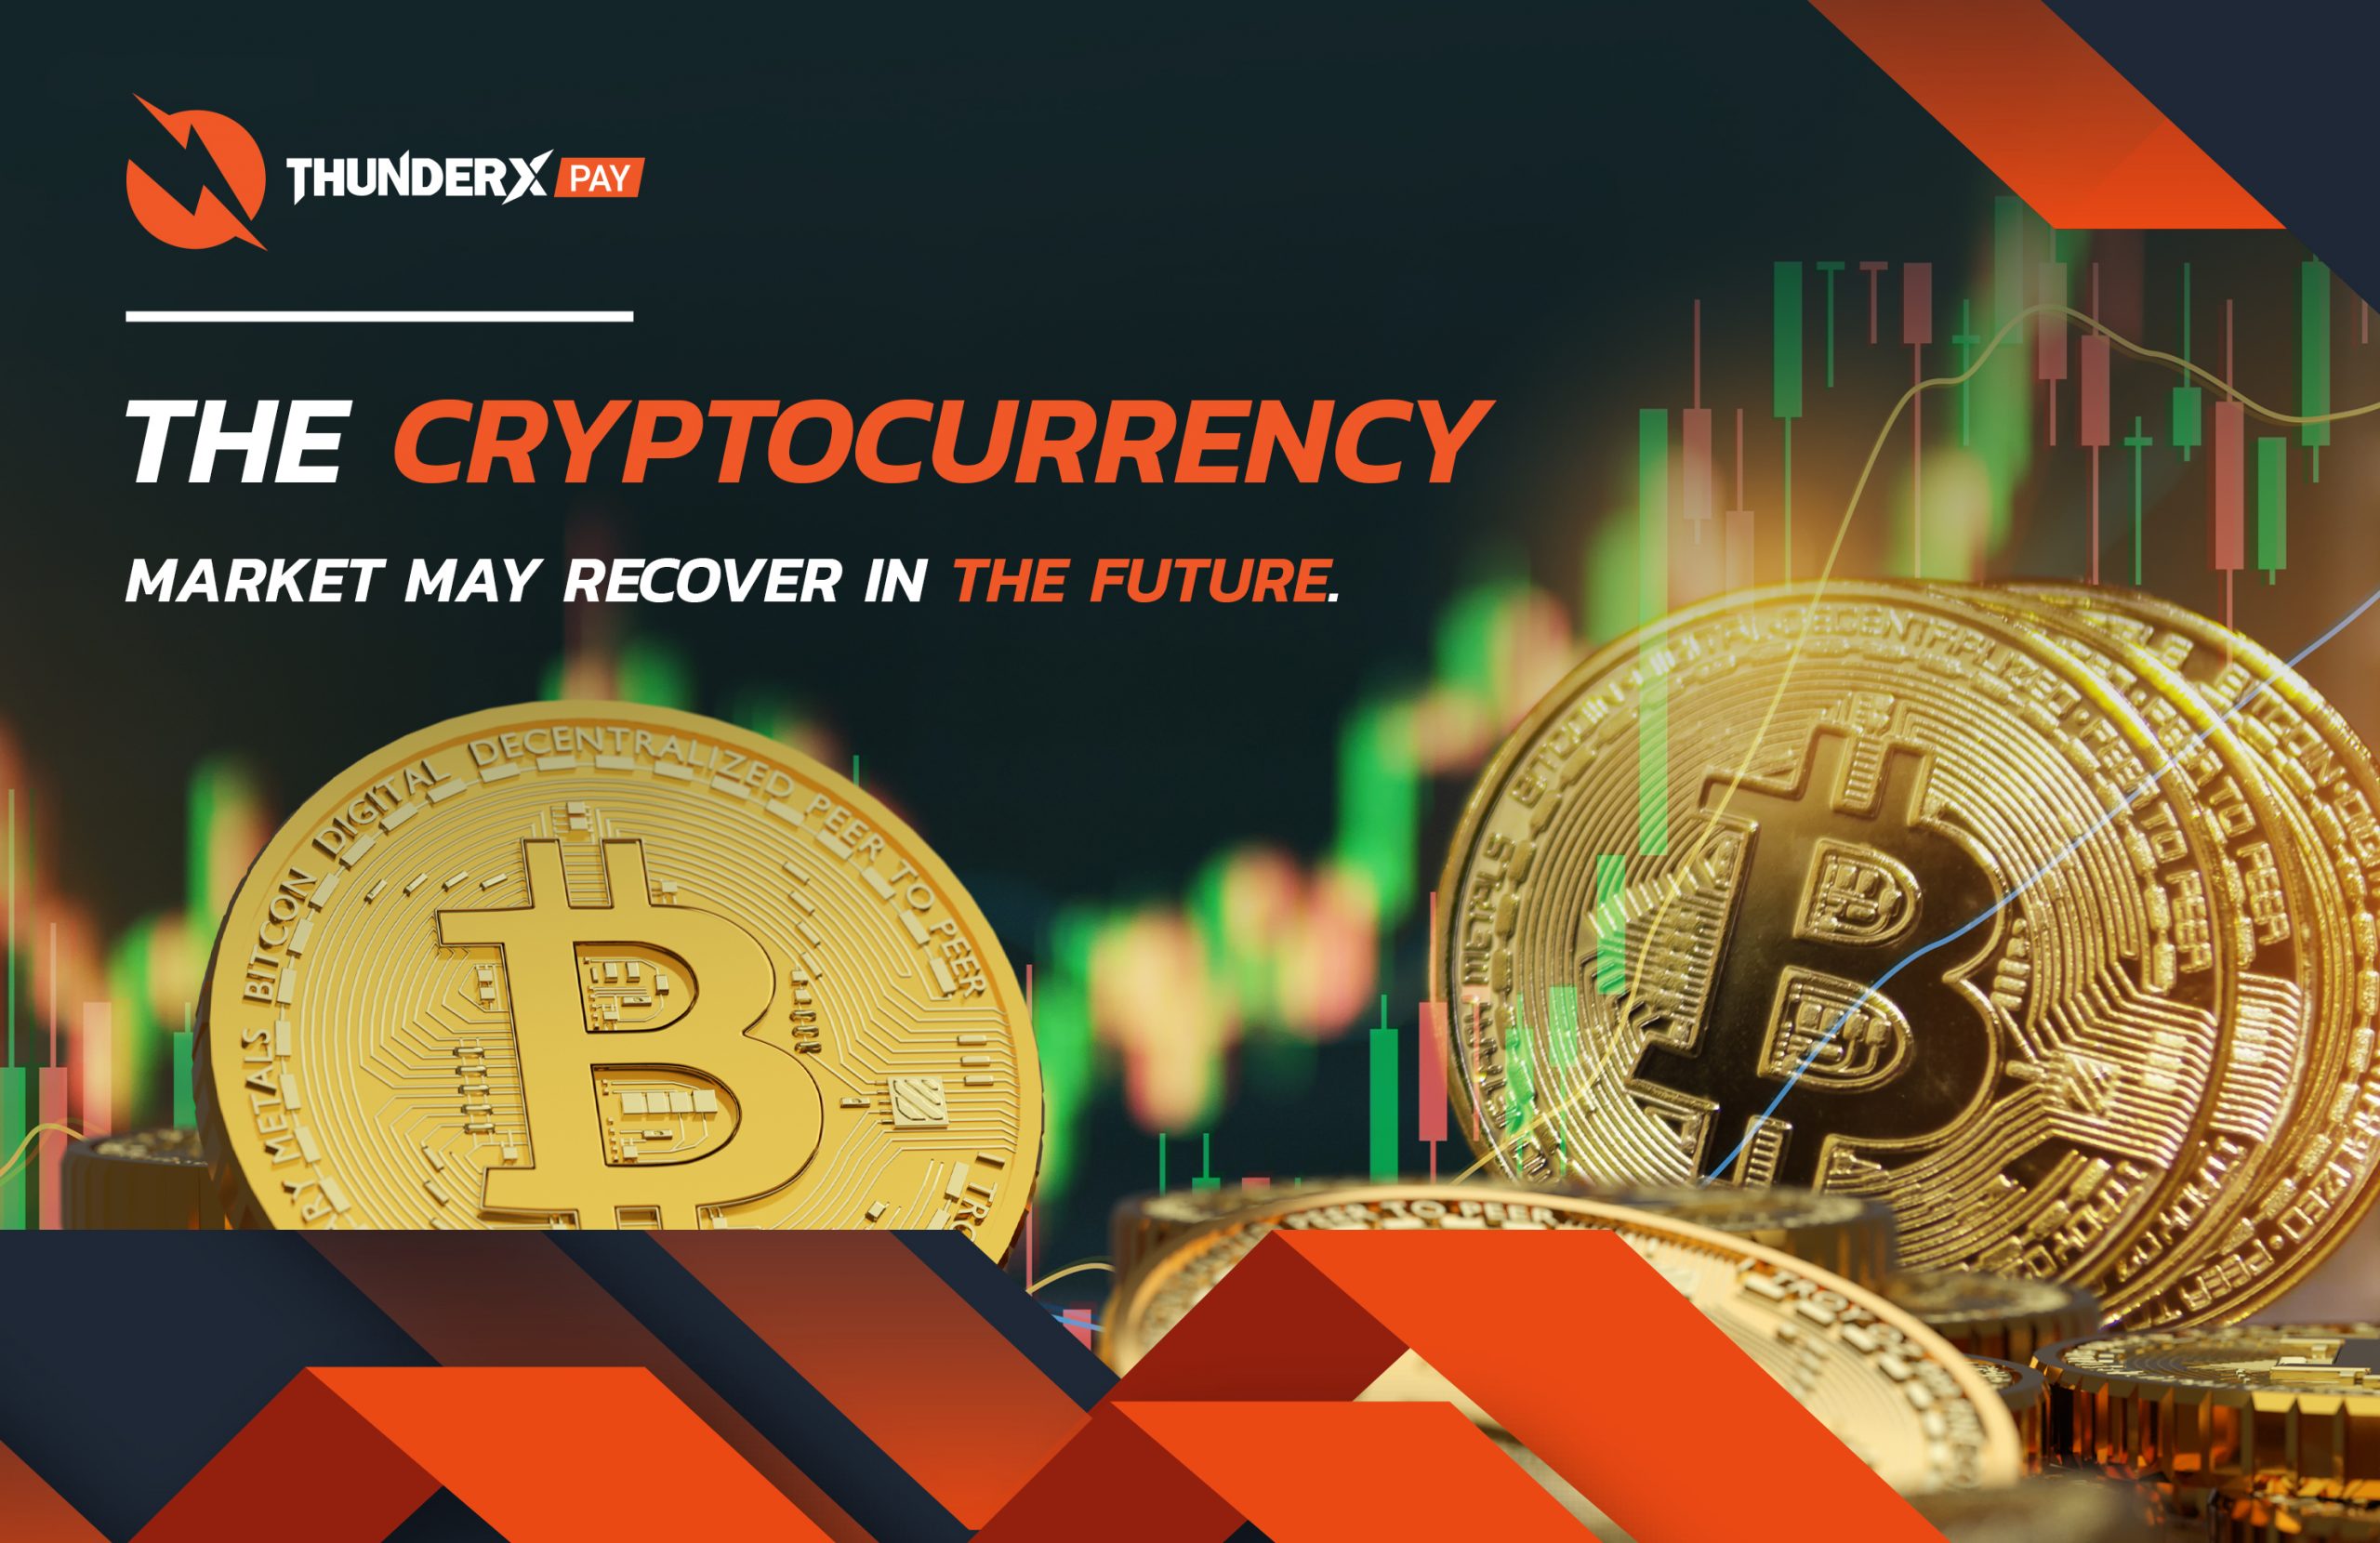 The cryptocurrency market may recover in the future.